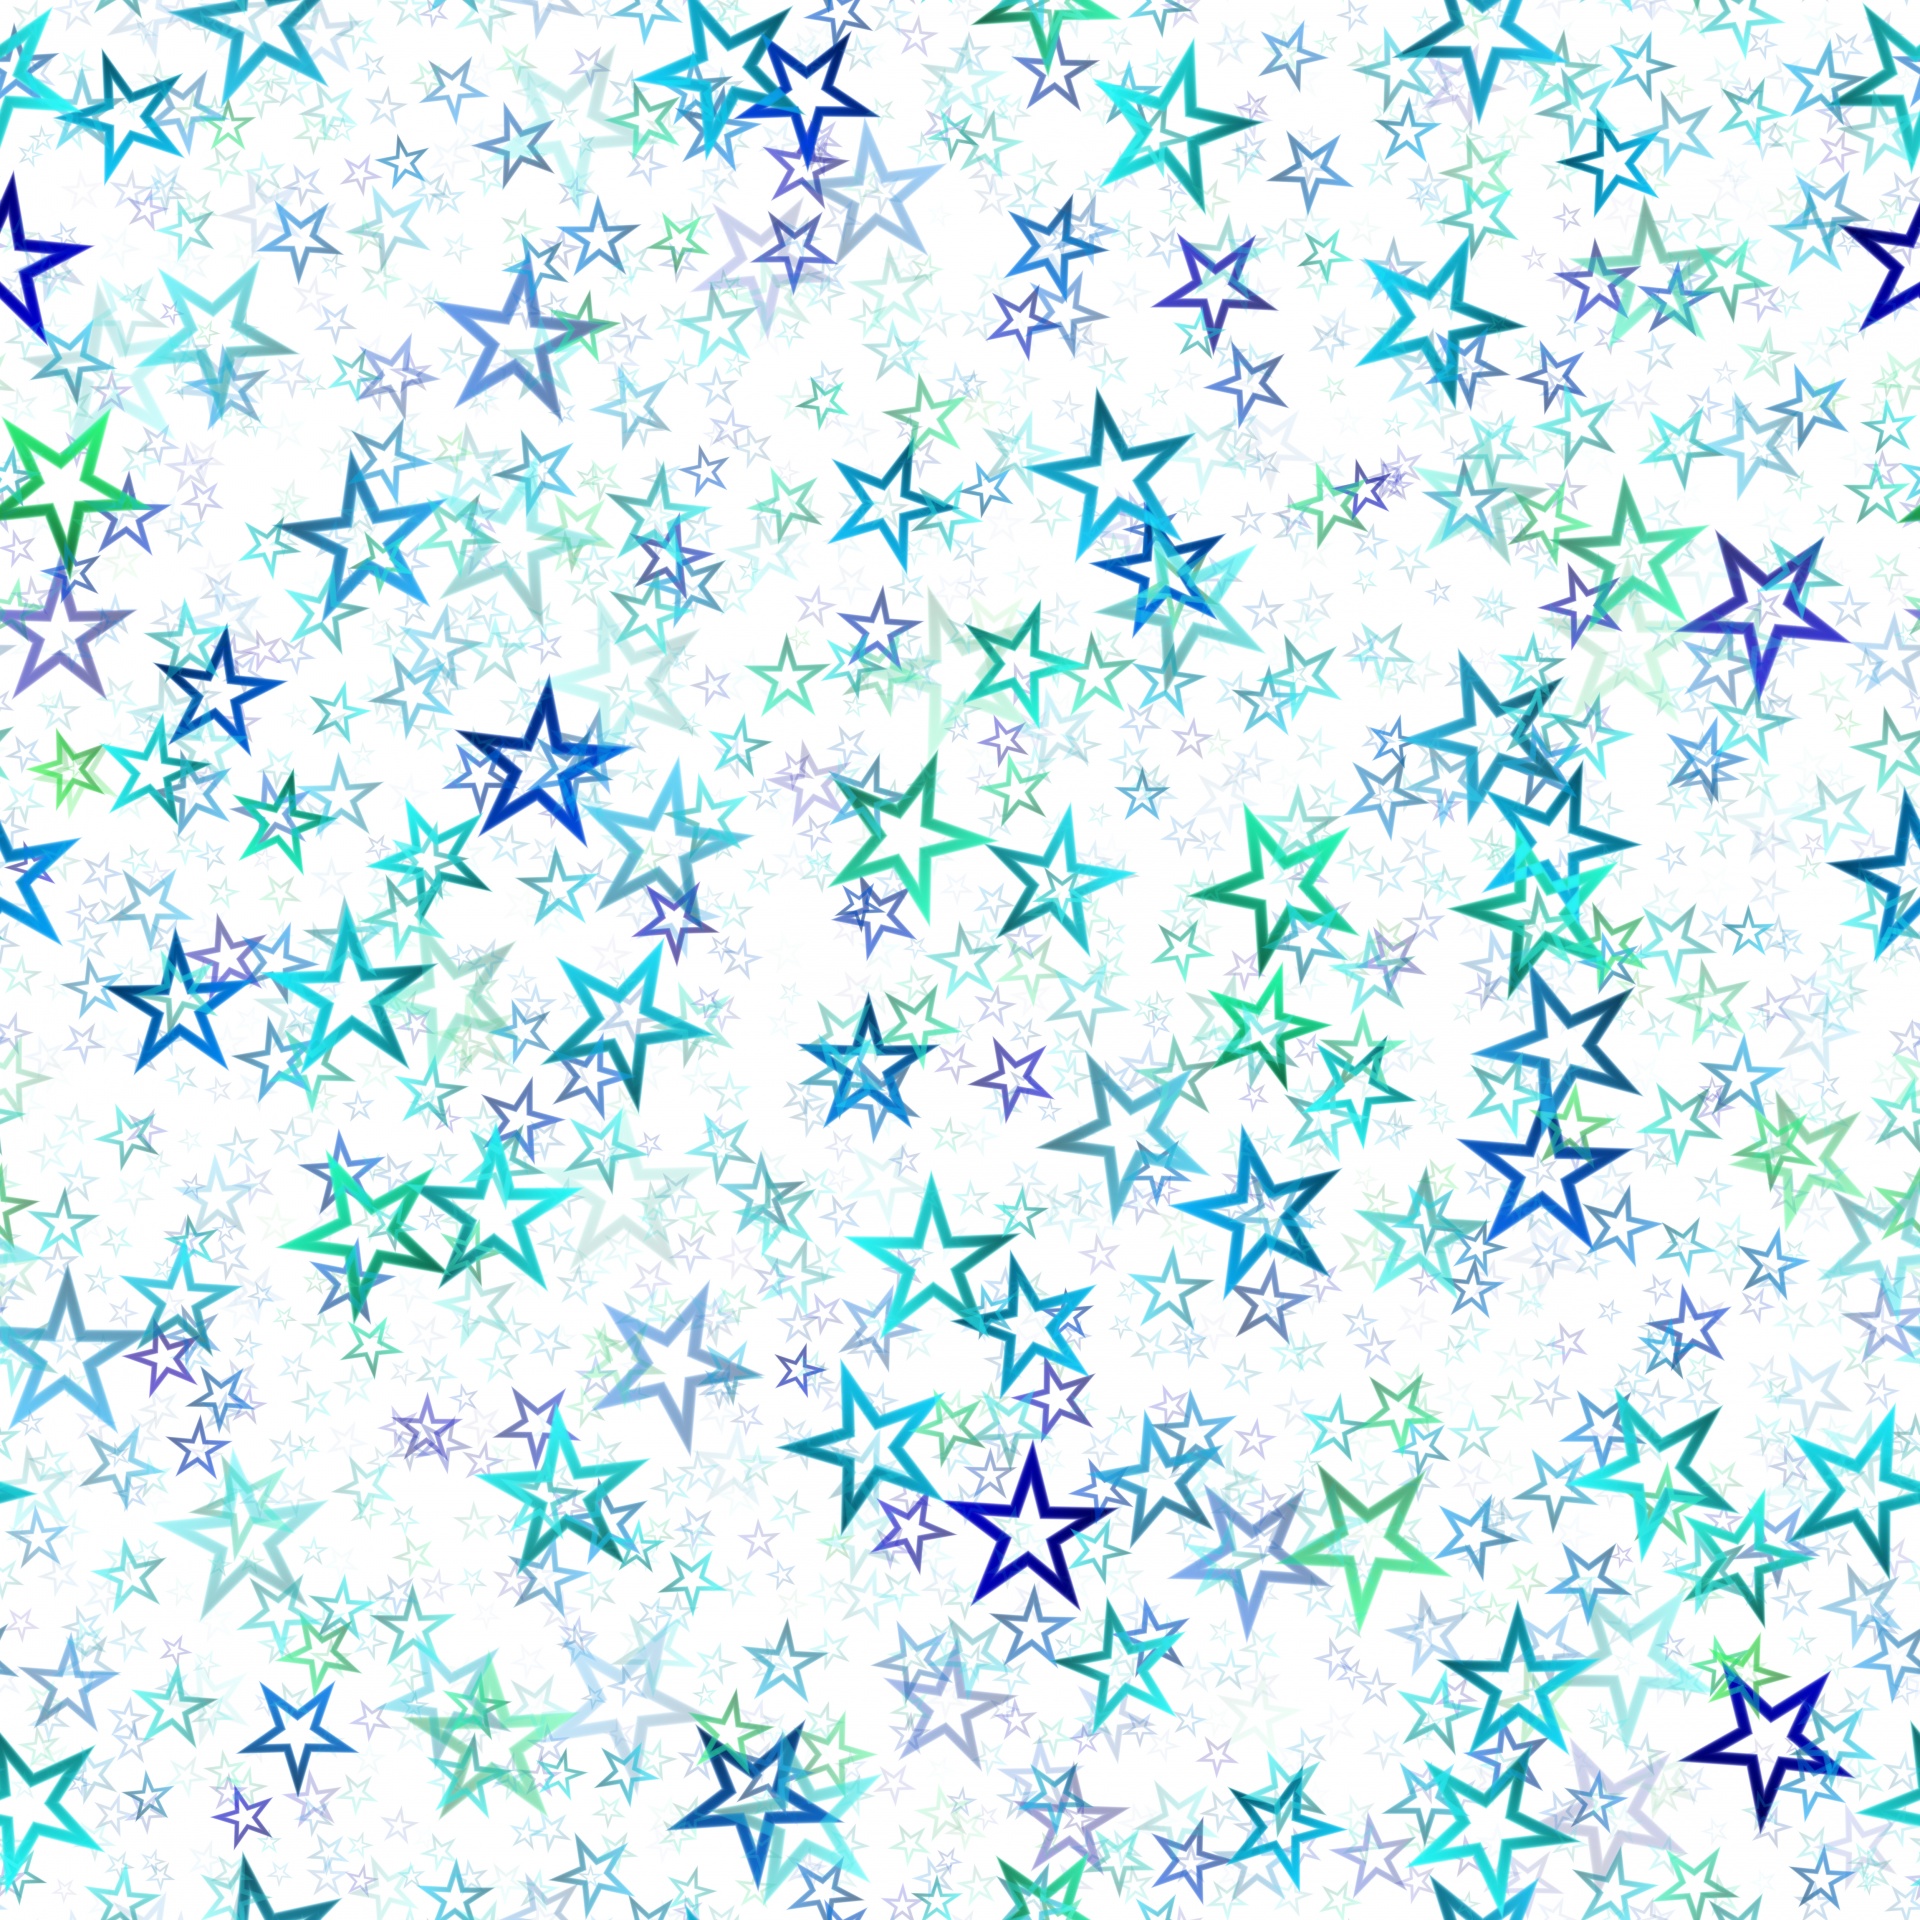 Pattern, background, paper, colors, colorful, stars, christmas, pattern, seamless, suitable, template, print, fantasy, gift, holidays, hd, design, decorative, creative, quality, high-resolution, wall, wallpaper,